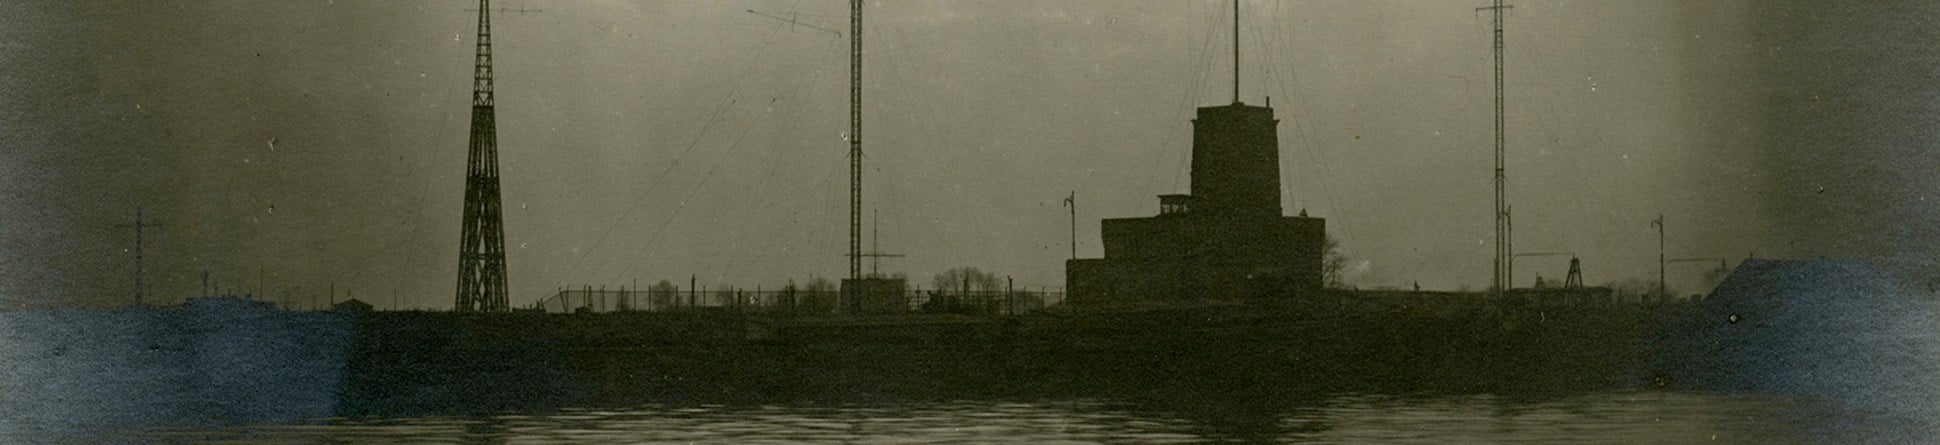 Wilhelmshaven, Germany, the main building, masts and aerial arrays of the signal station, its transmissions were major targets for the interception stations on England’s east coast